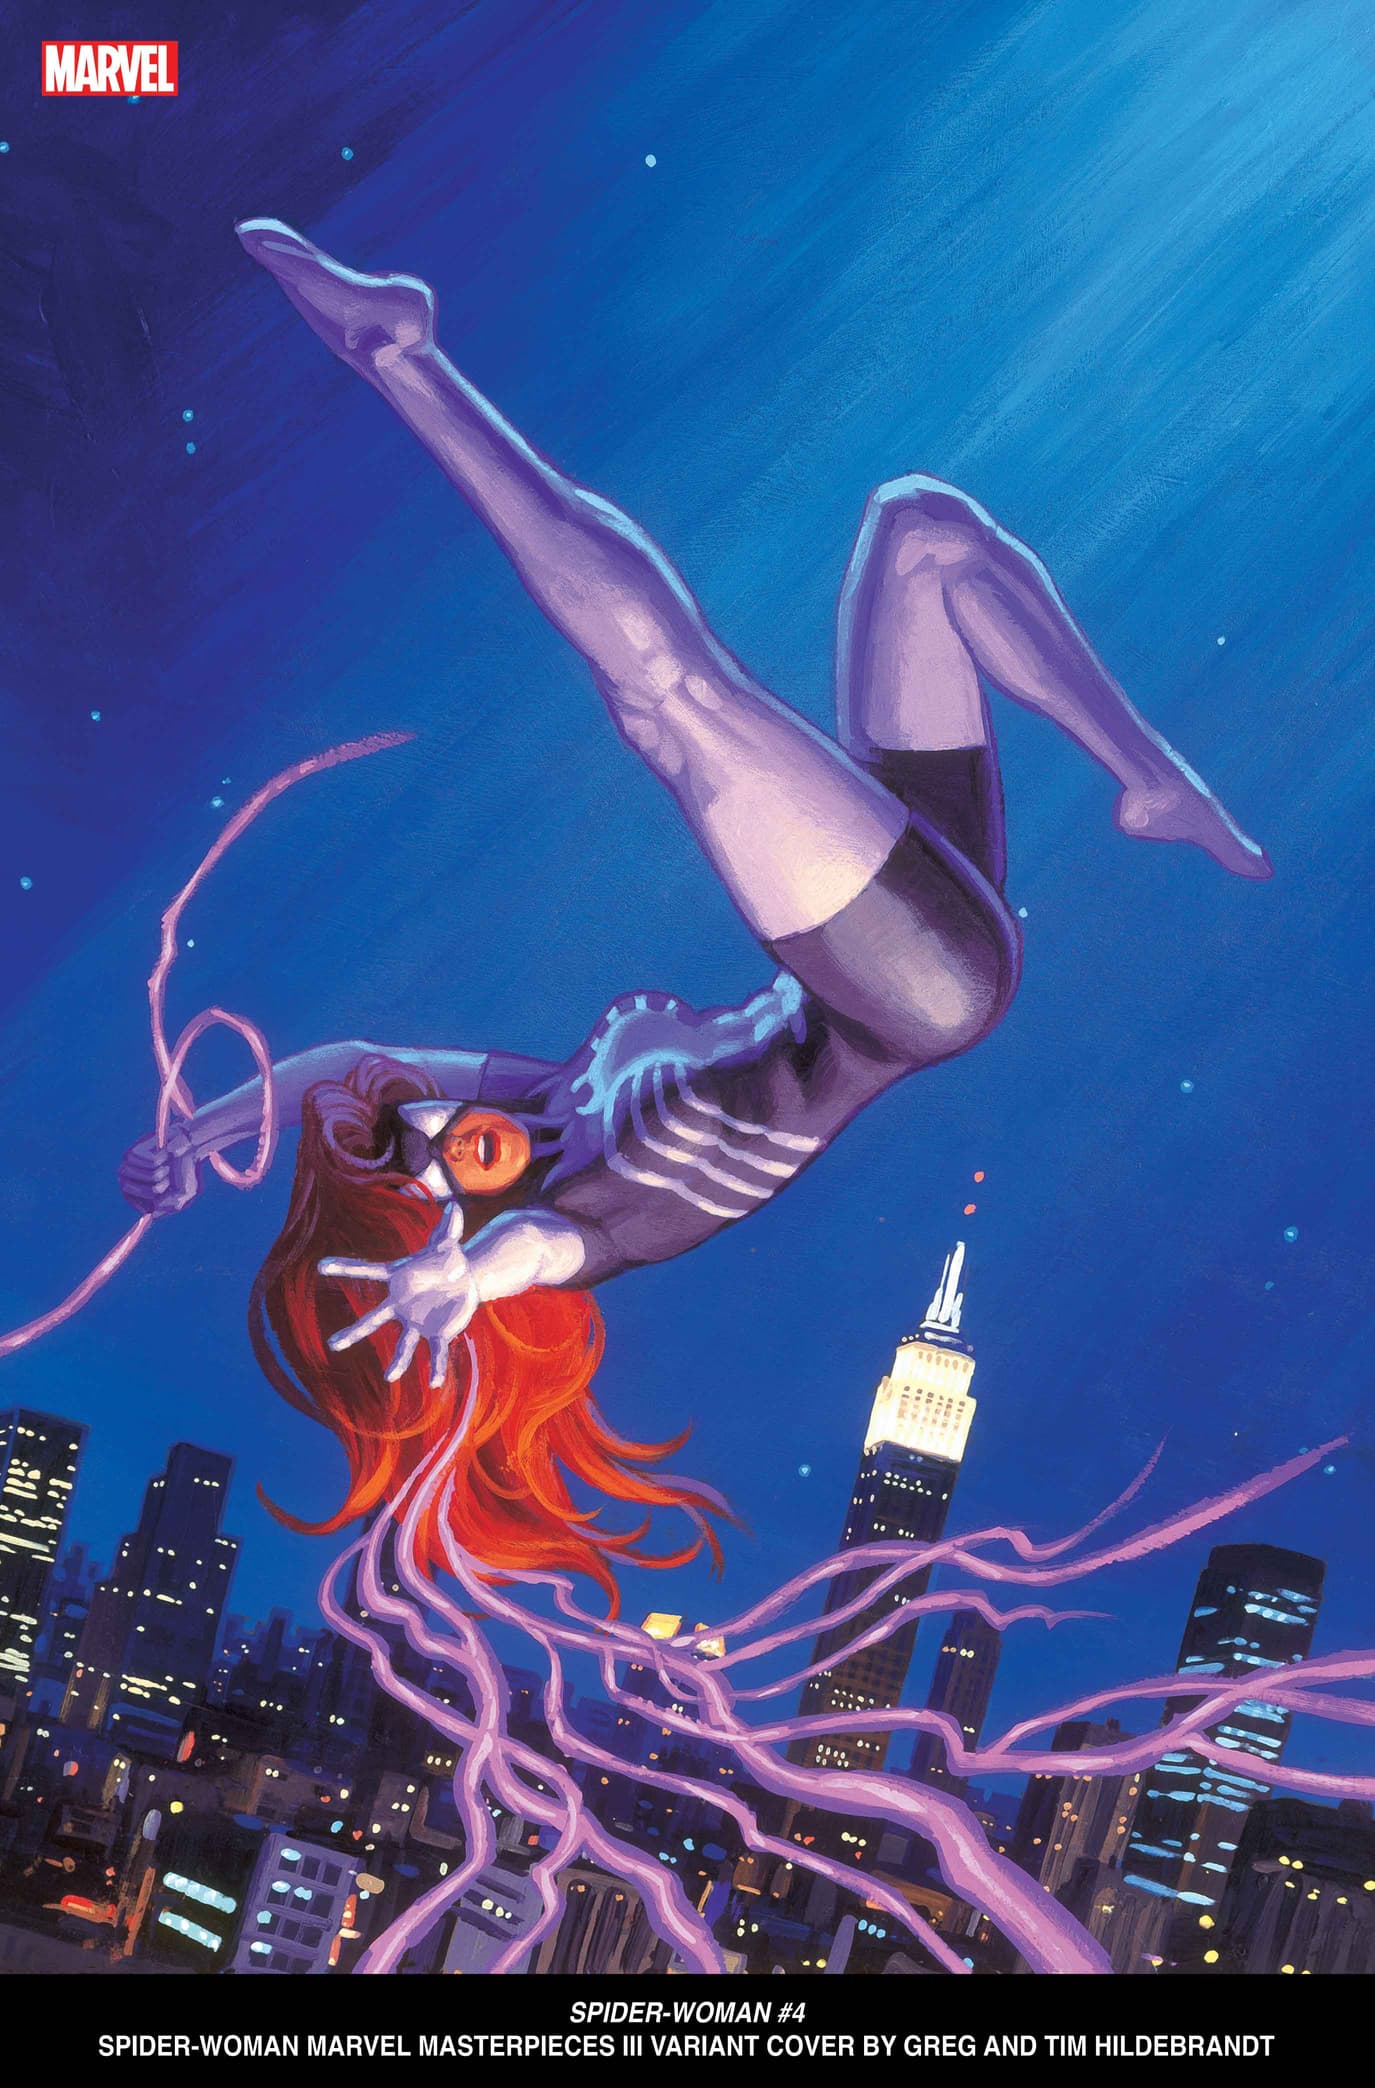 SPIDER-WOMAN #4 Spider-Woman Marvel Masterpieces III Variant Cover by Greg and Tim Hildebrandt